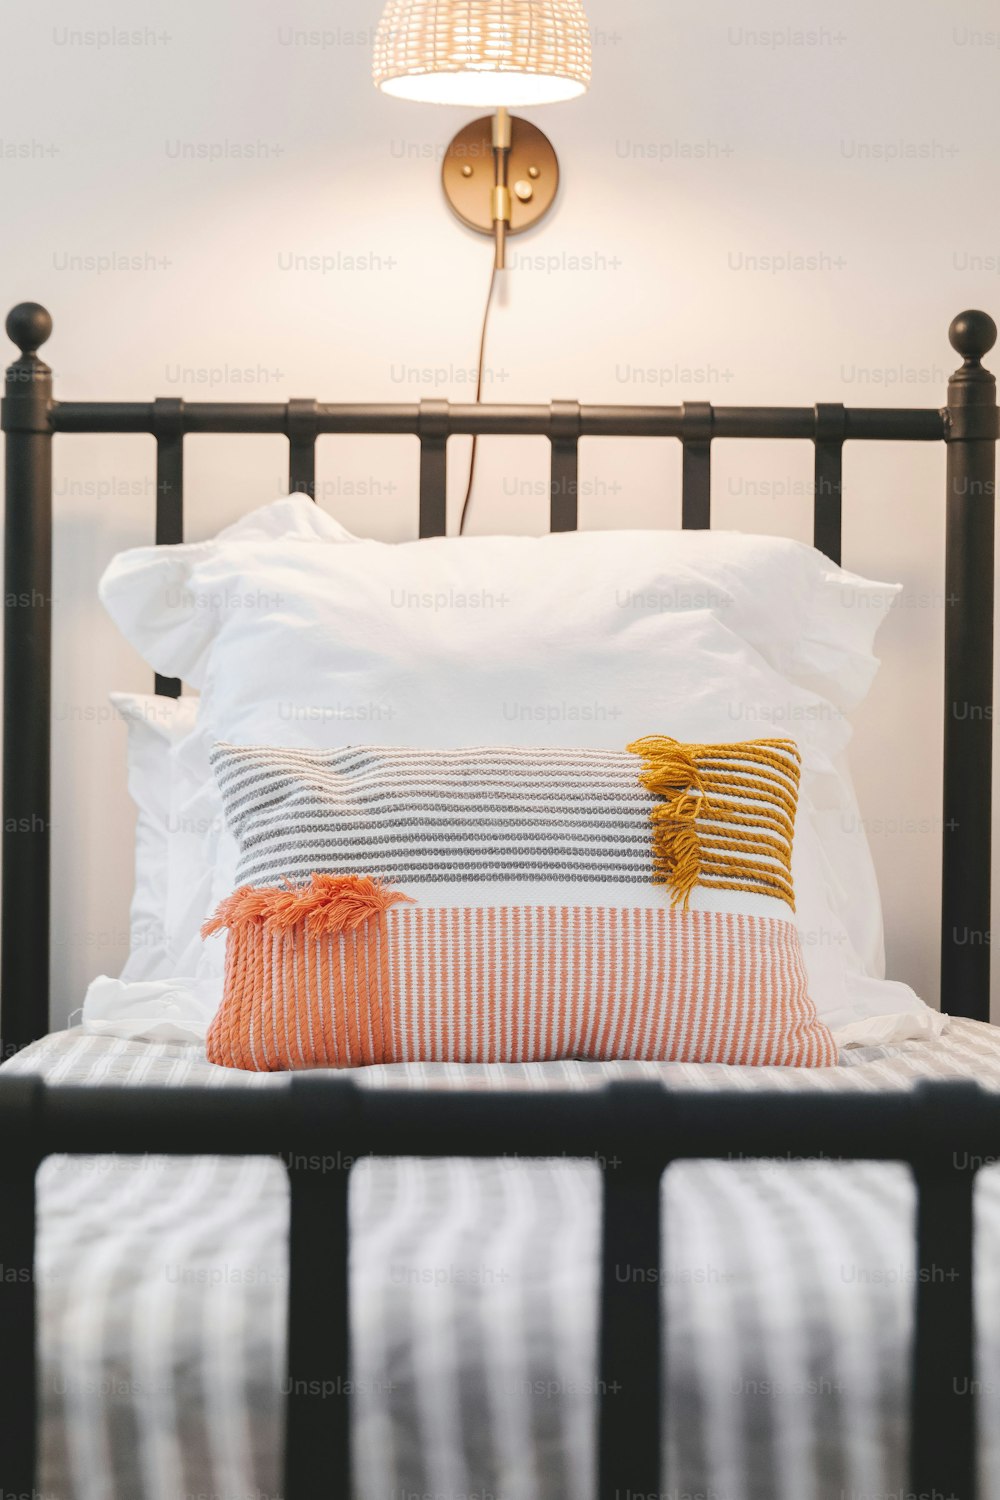 500+ Pillow Pictures [HD]  Download Free Images on Unsplash